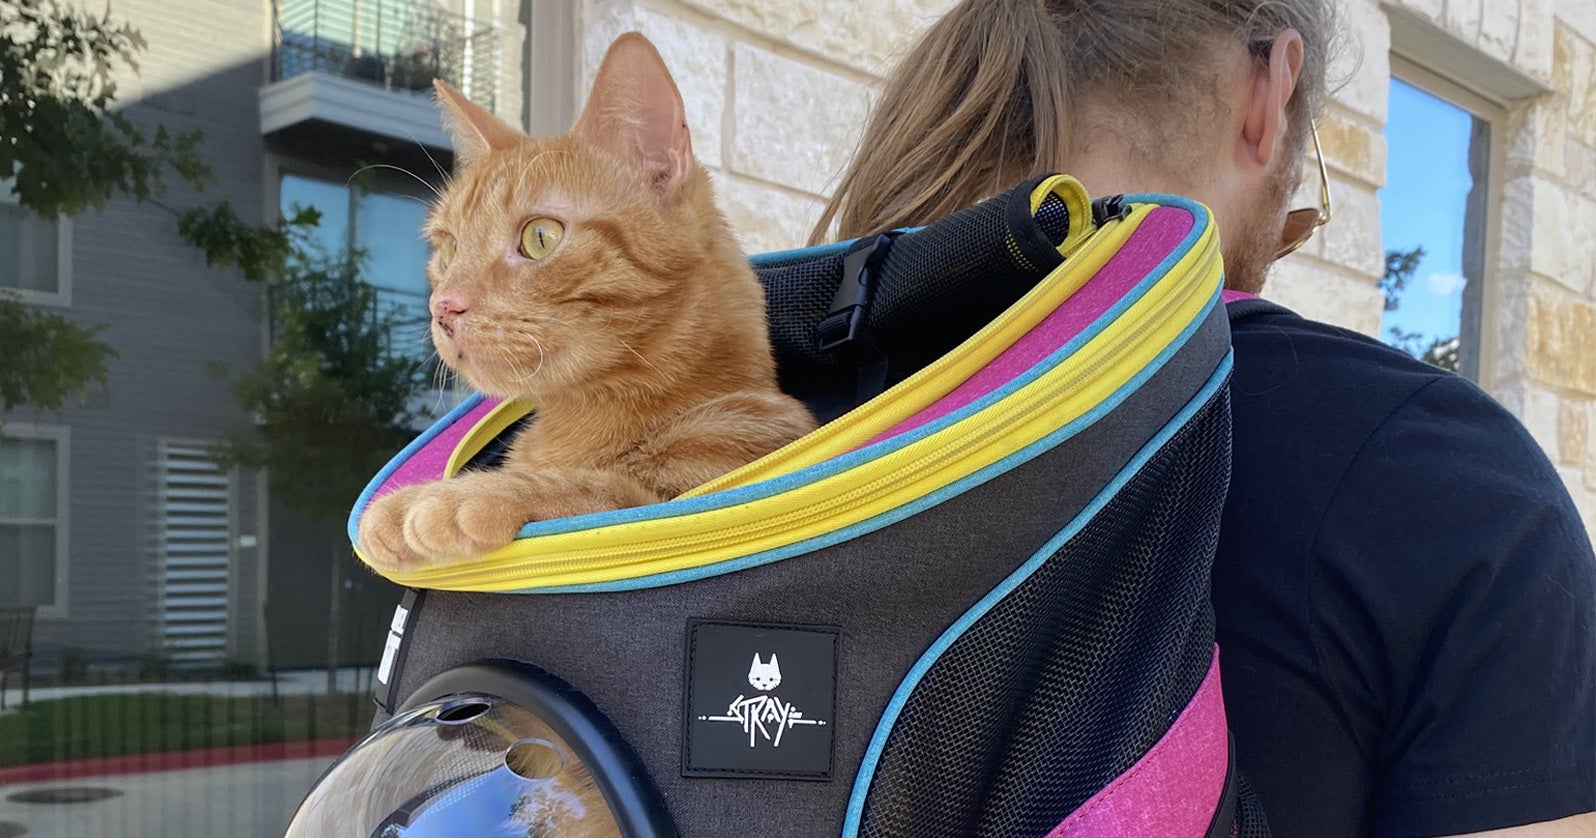 The Stray cat backpack.